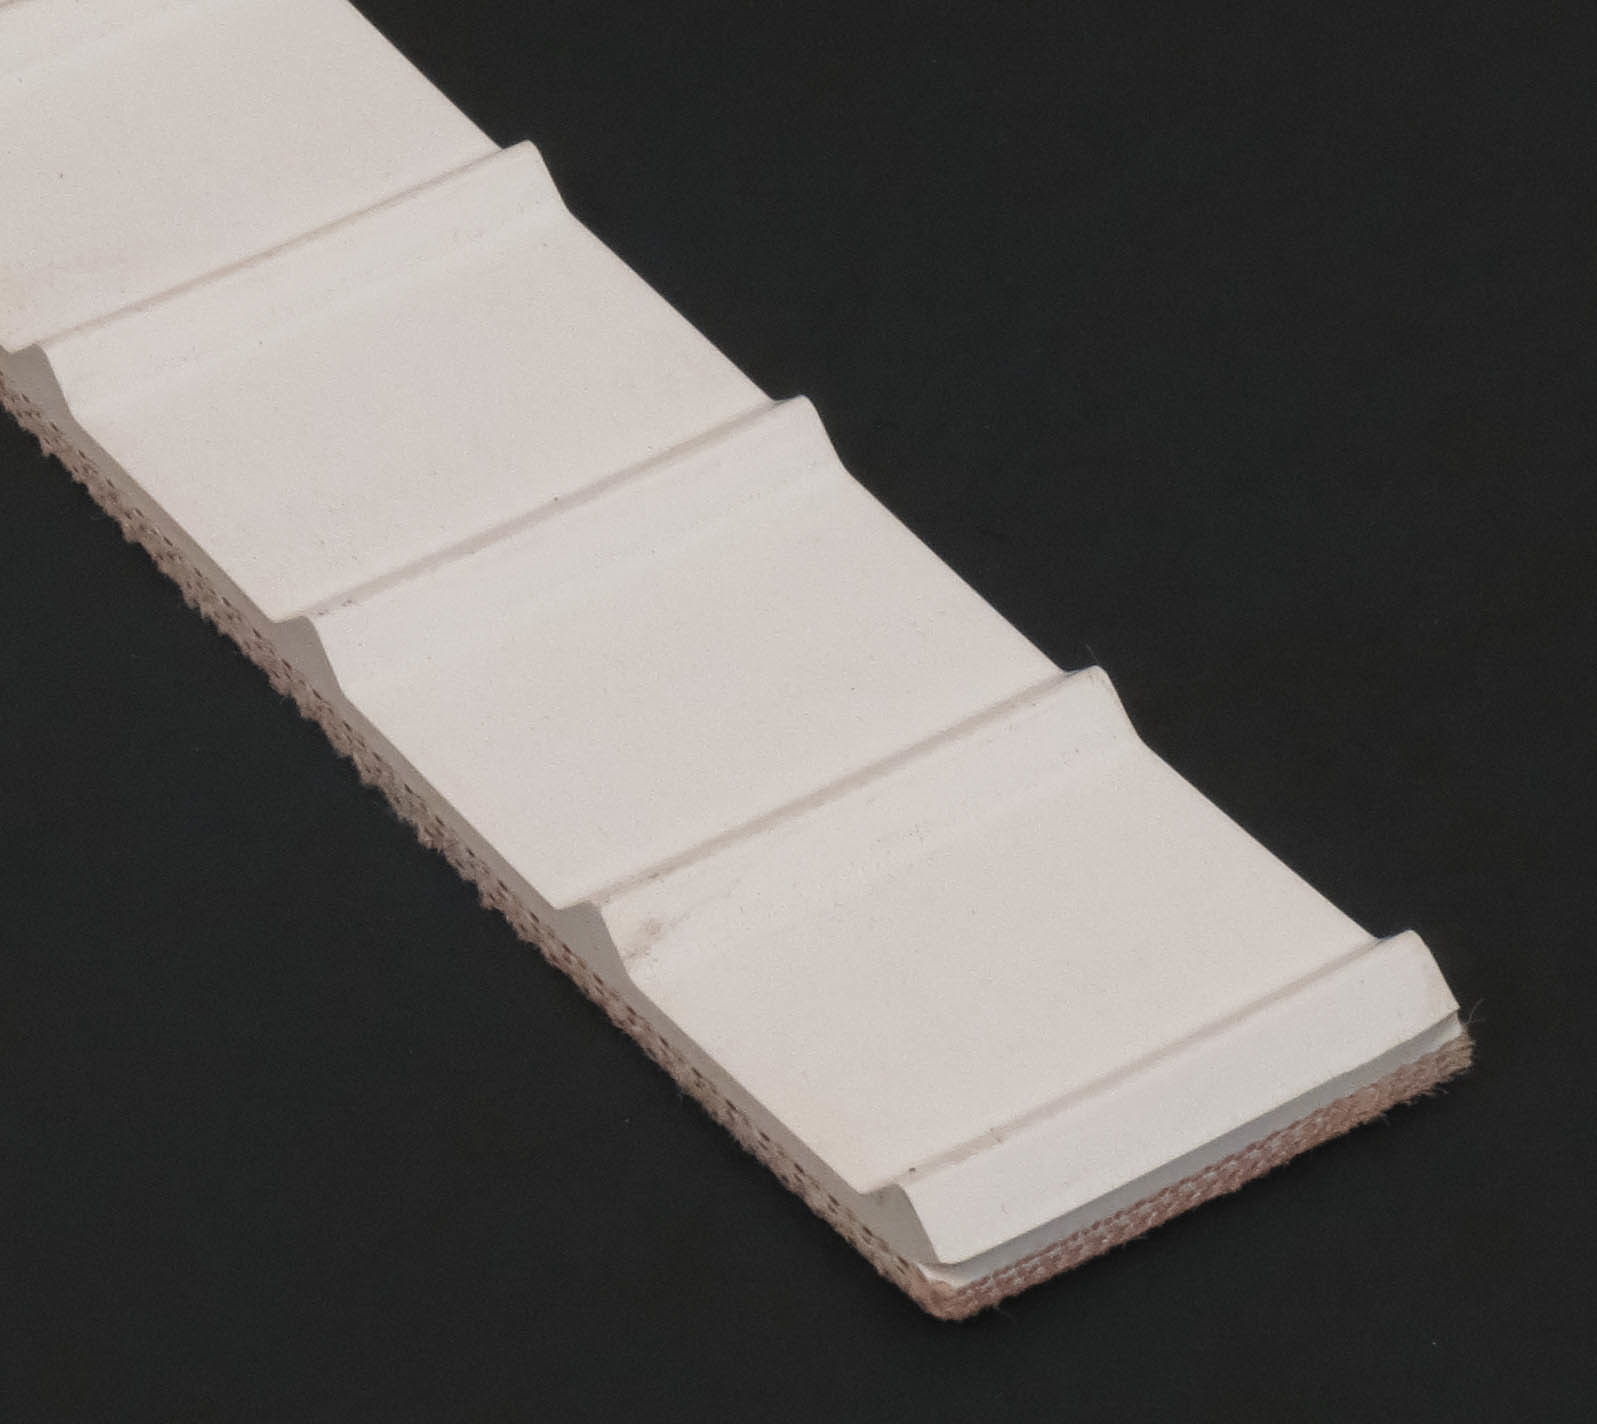 2 Inch Wide 2 Ply Tan Gum Rubber by Bare High Grip Rough Top Incline Conveyor Belt Material 10 Foot Length